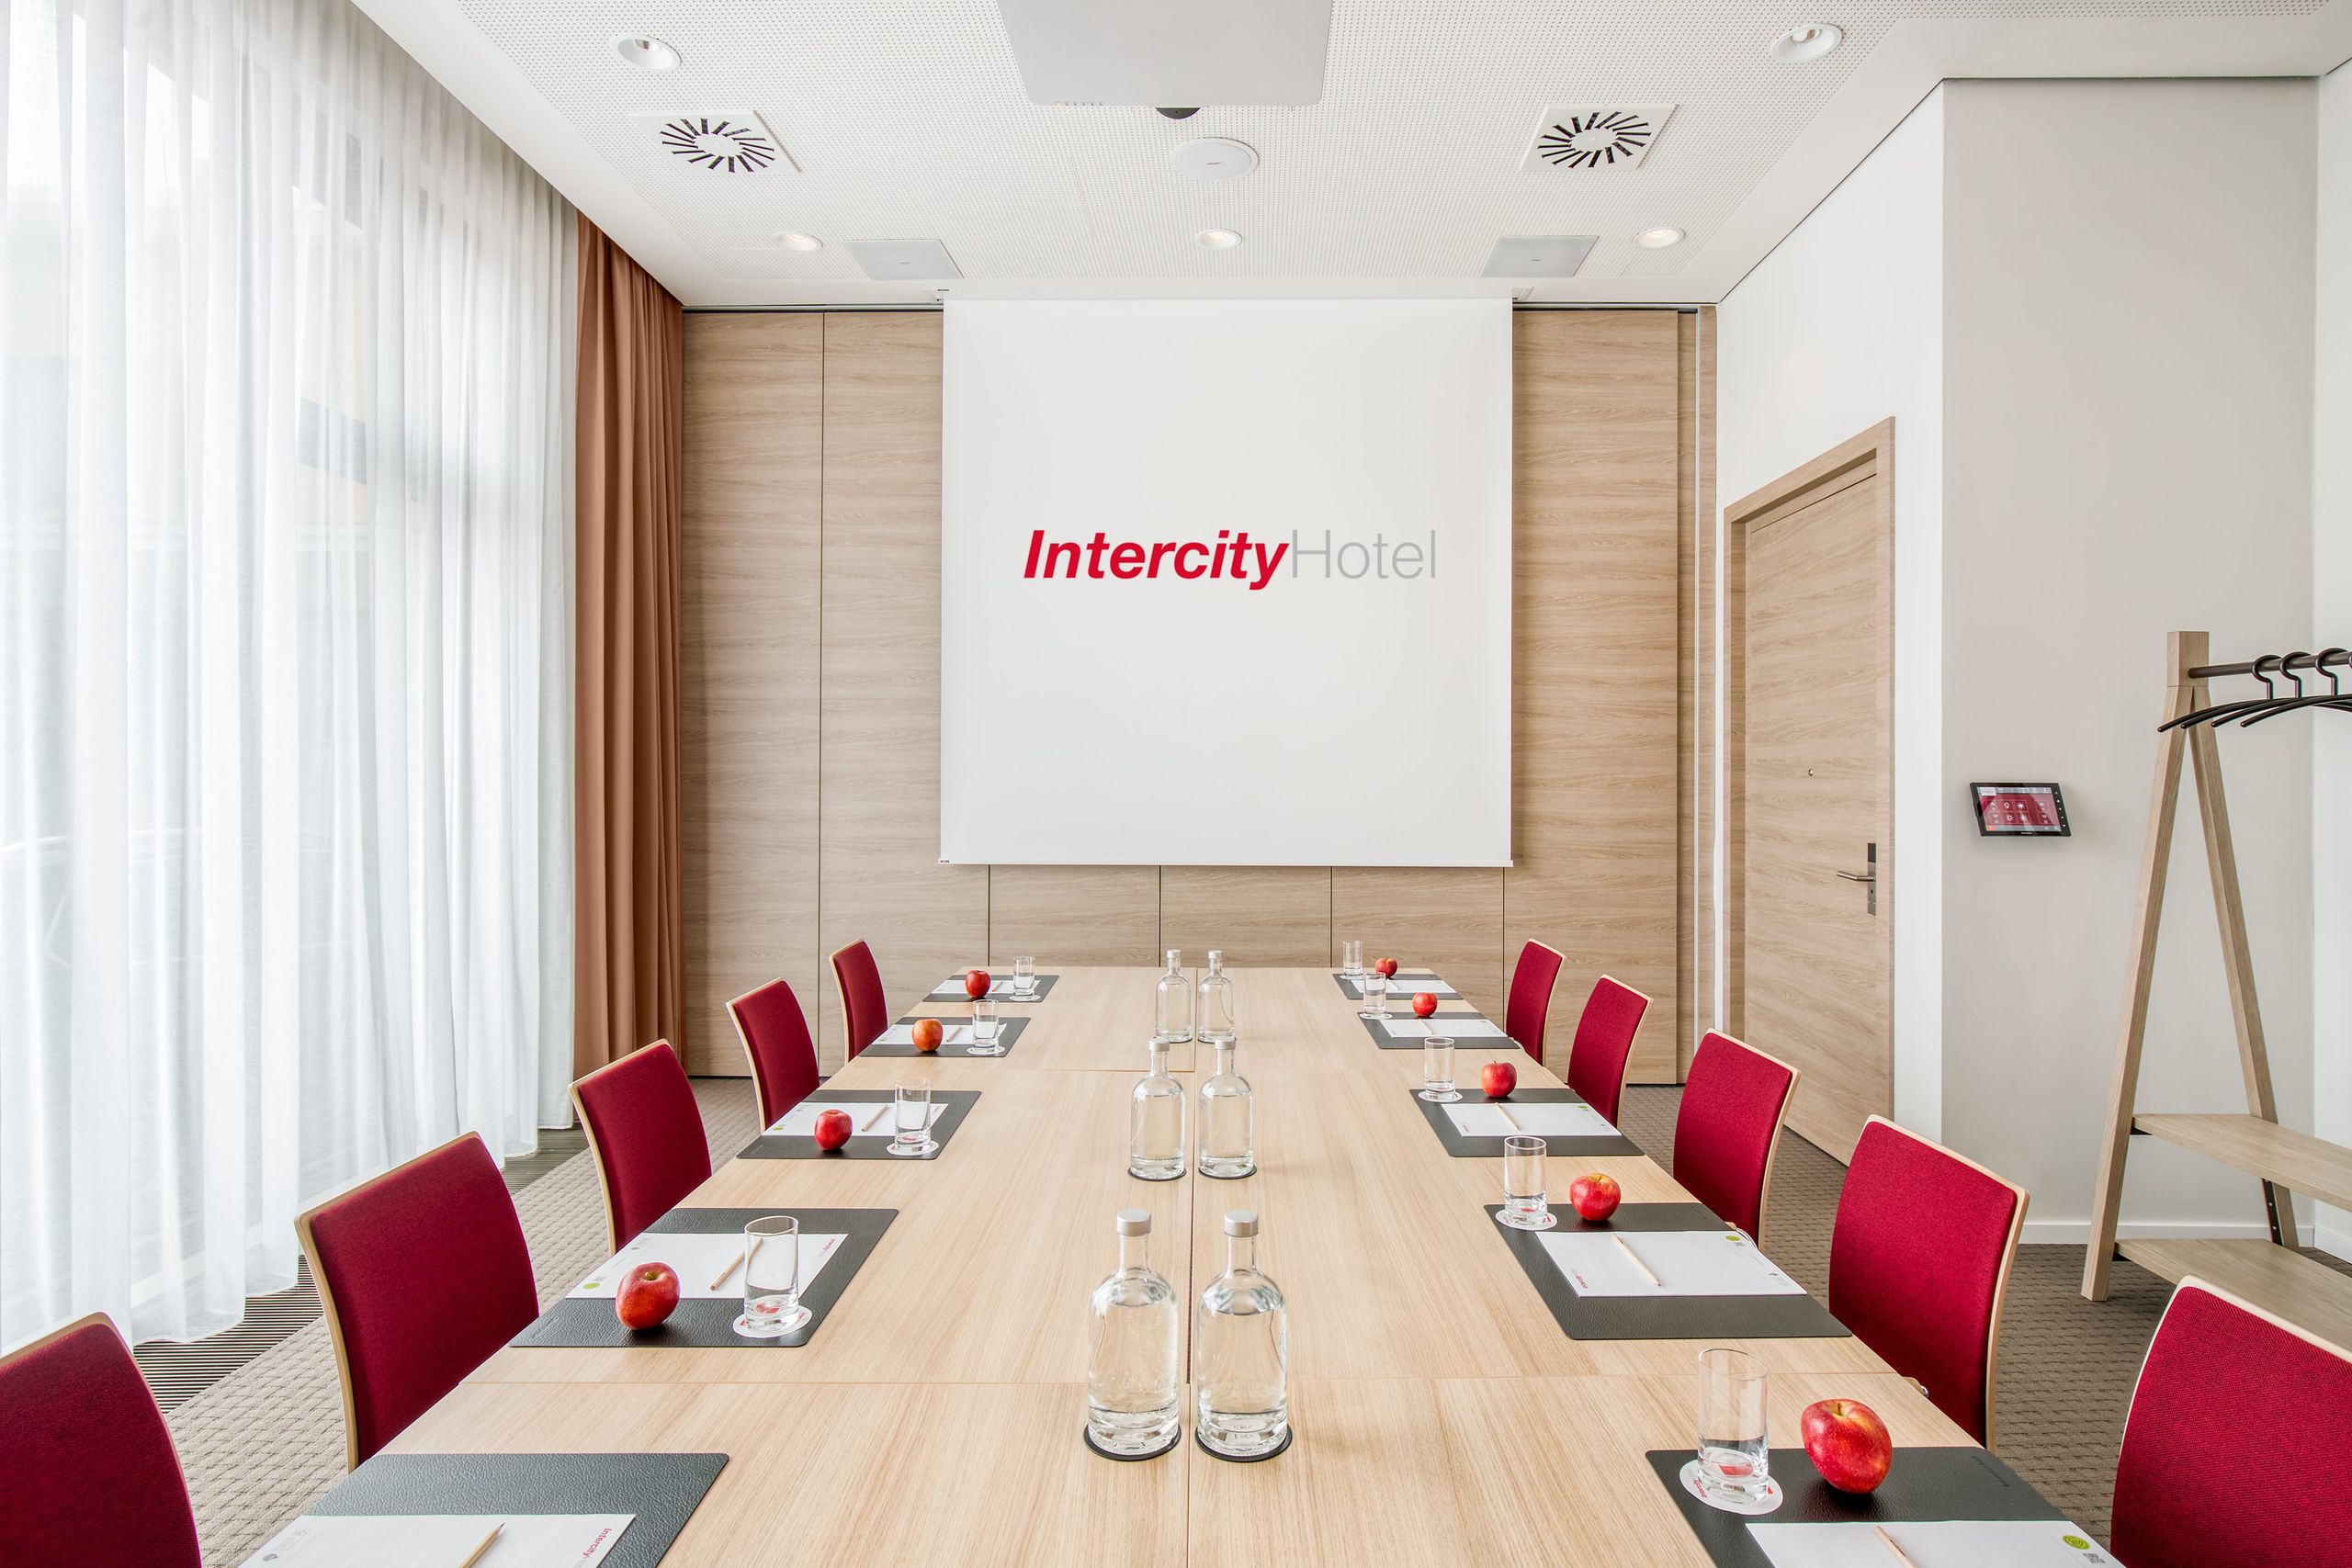 IntercityHotel Hildesheim - Meetings, Incentives, Conferences, Events